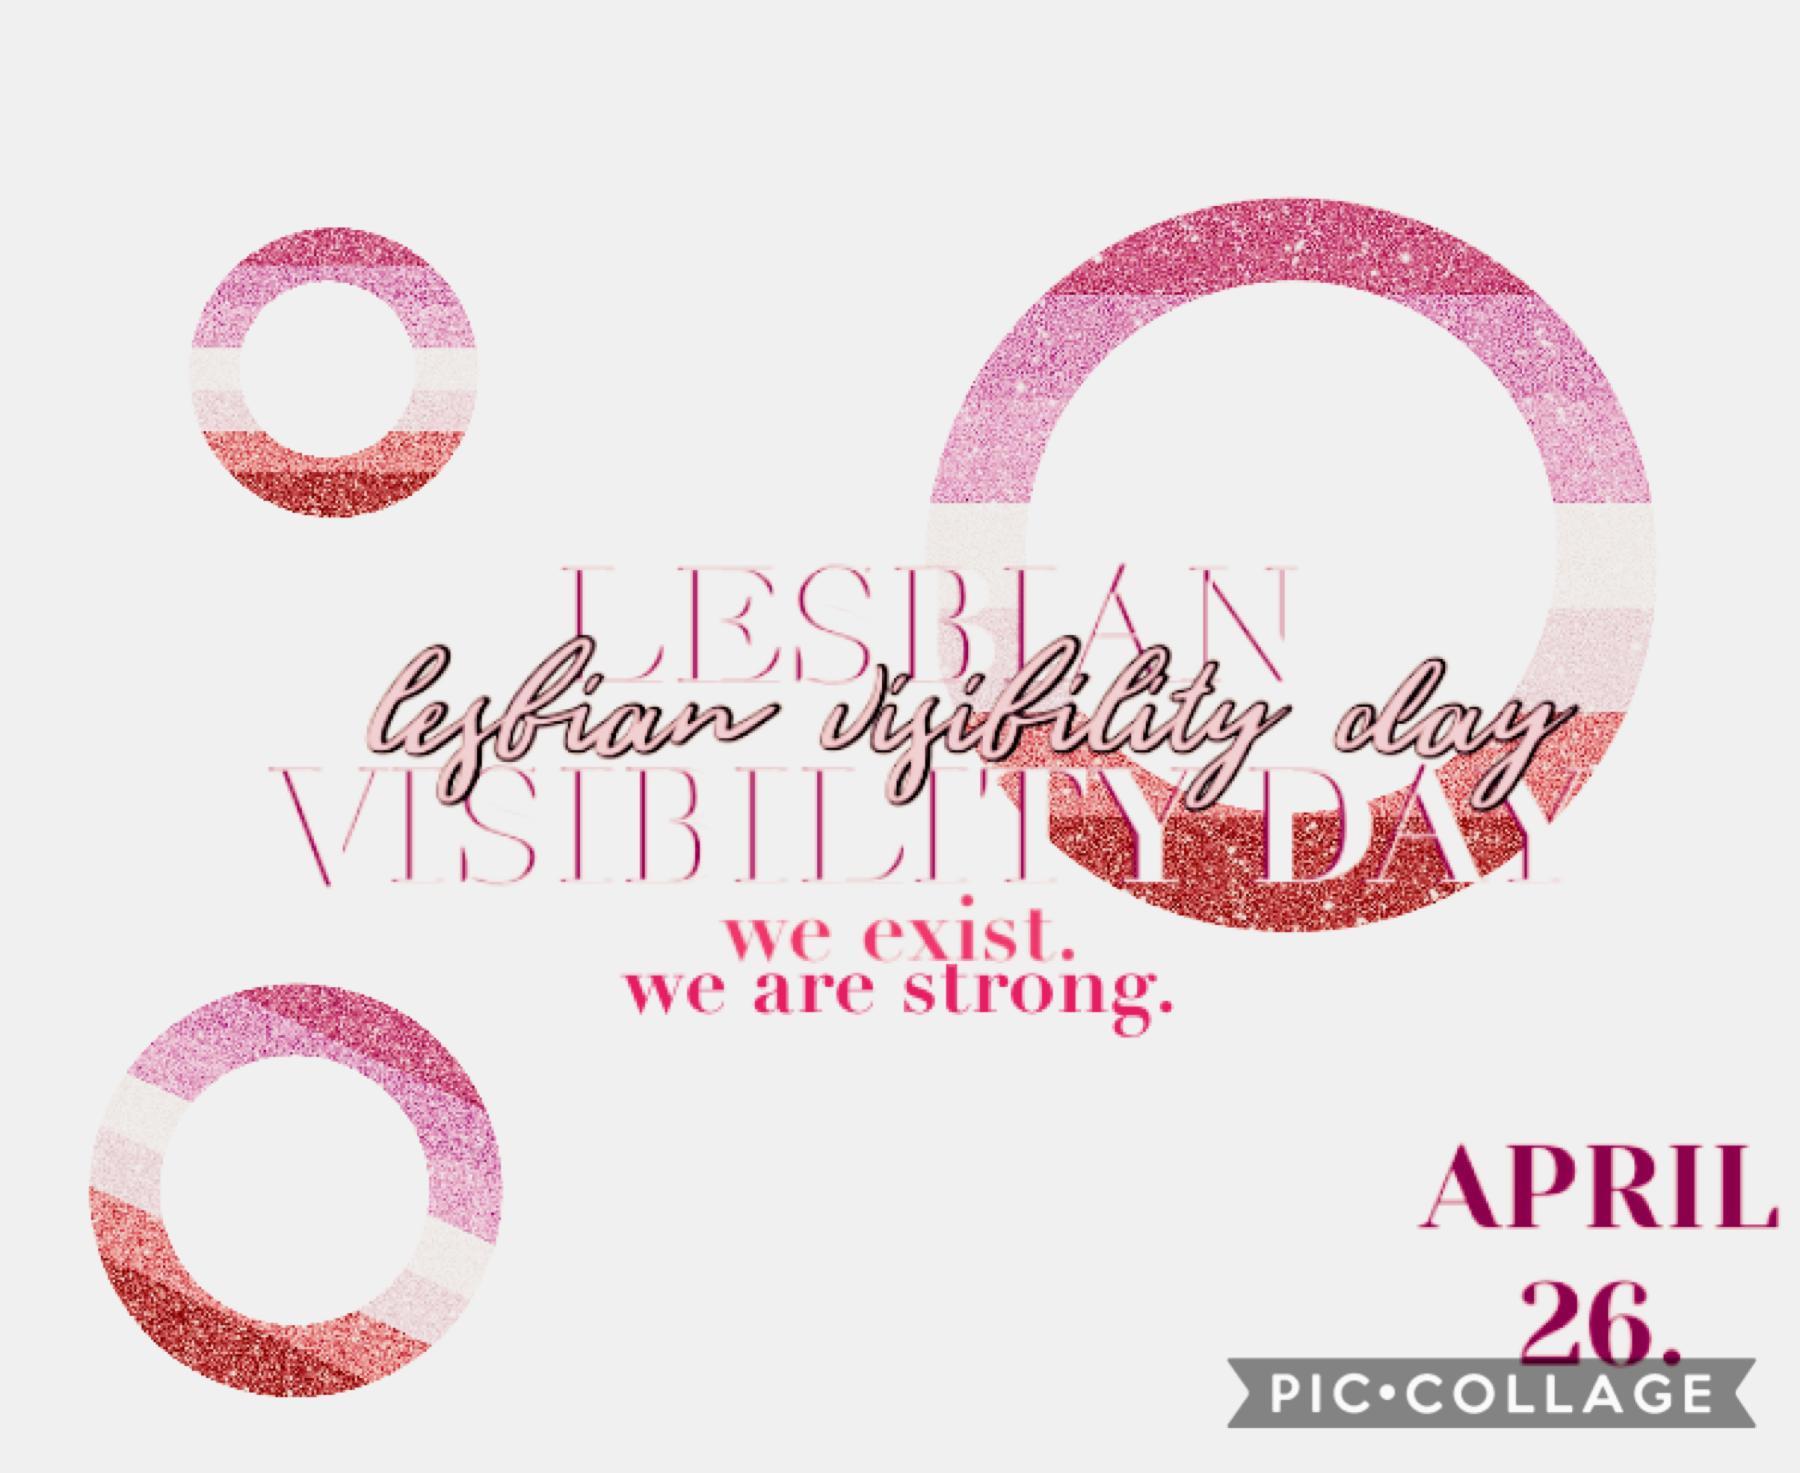 💕HAPPY LESBIAN VISIBILITY DAY💕